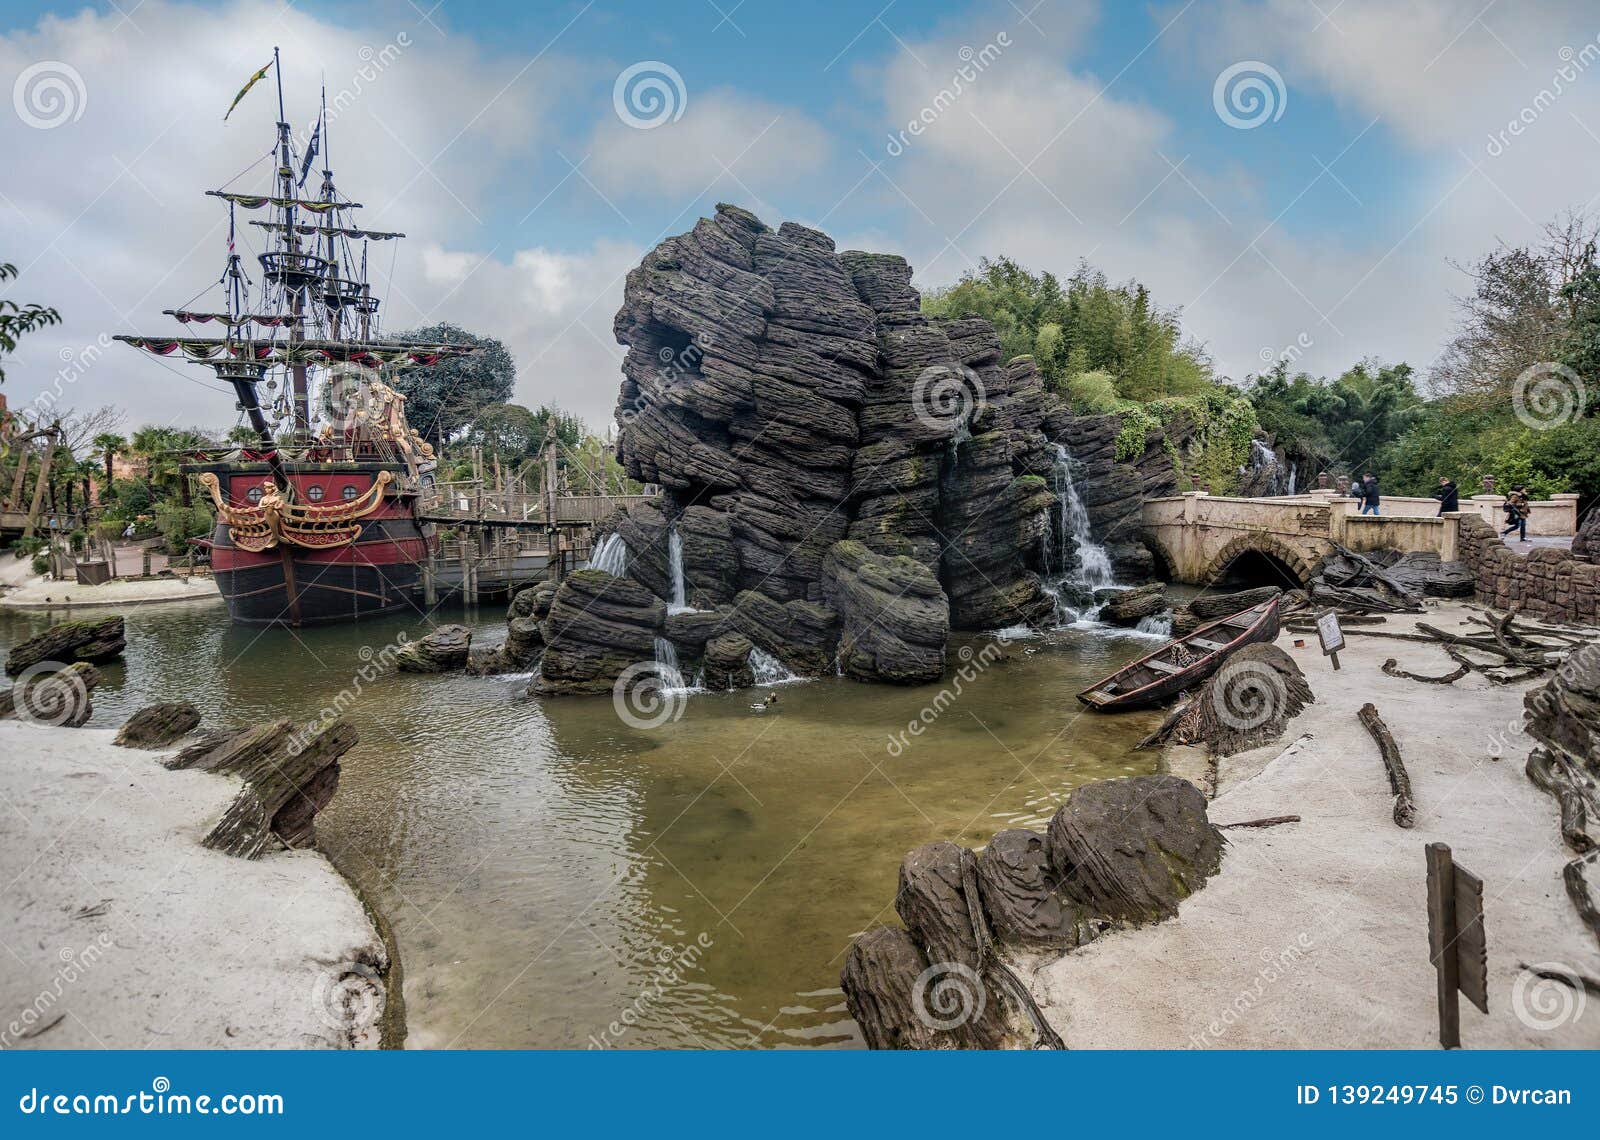 Skull Rock is the Decoration Pirates of the Caribbean Attraction